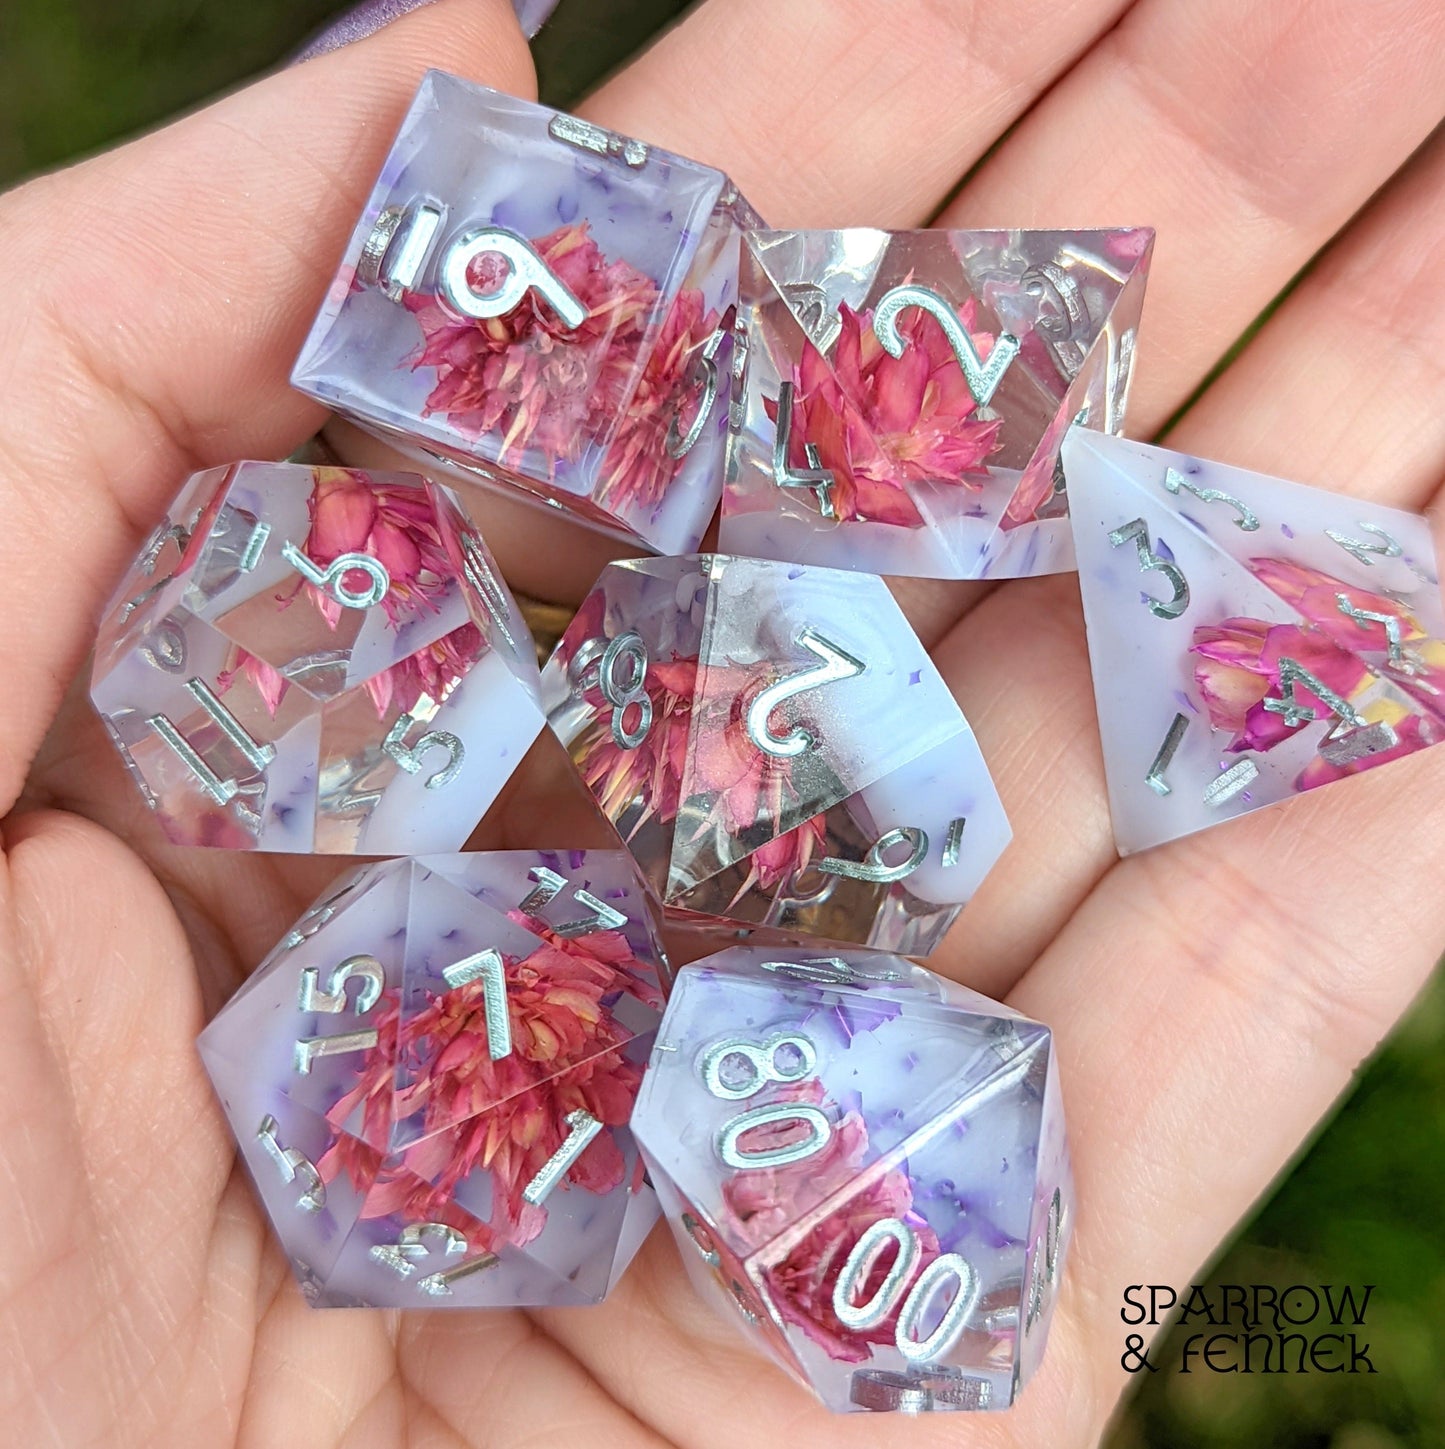 Crystal Bloom Handmade Sharp Edge Resin Dice Set. 7 Piece DND dice set with real Dried Flowers